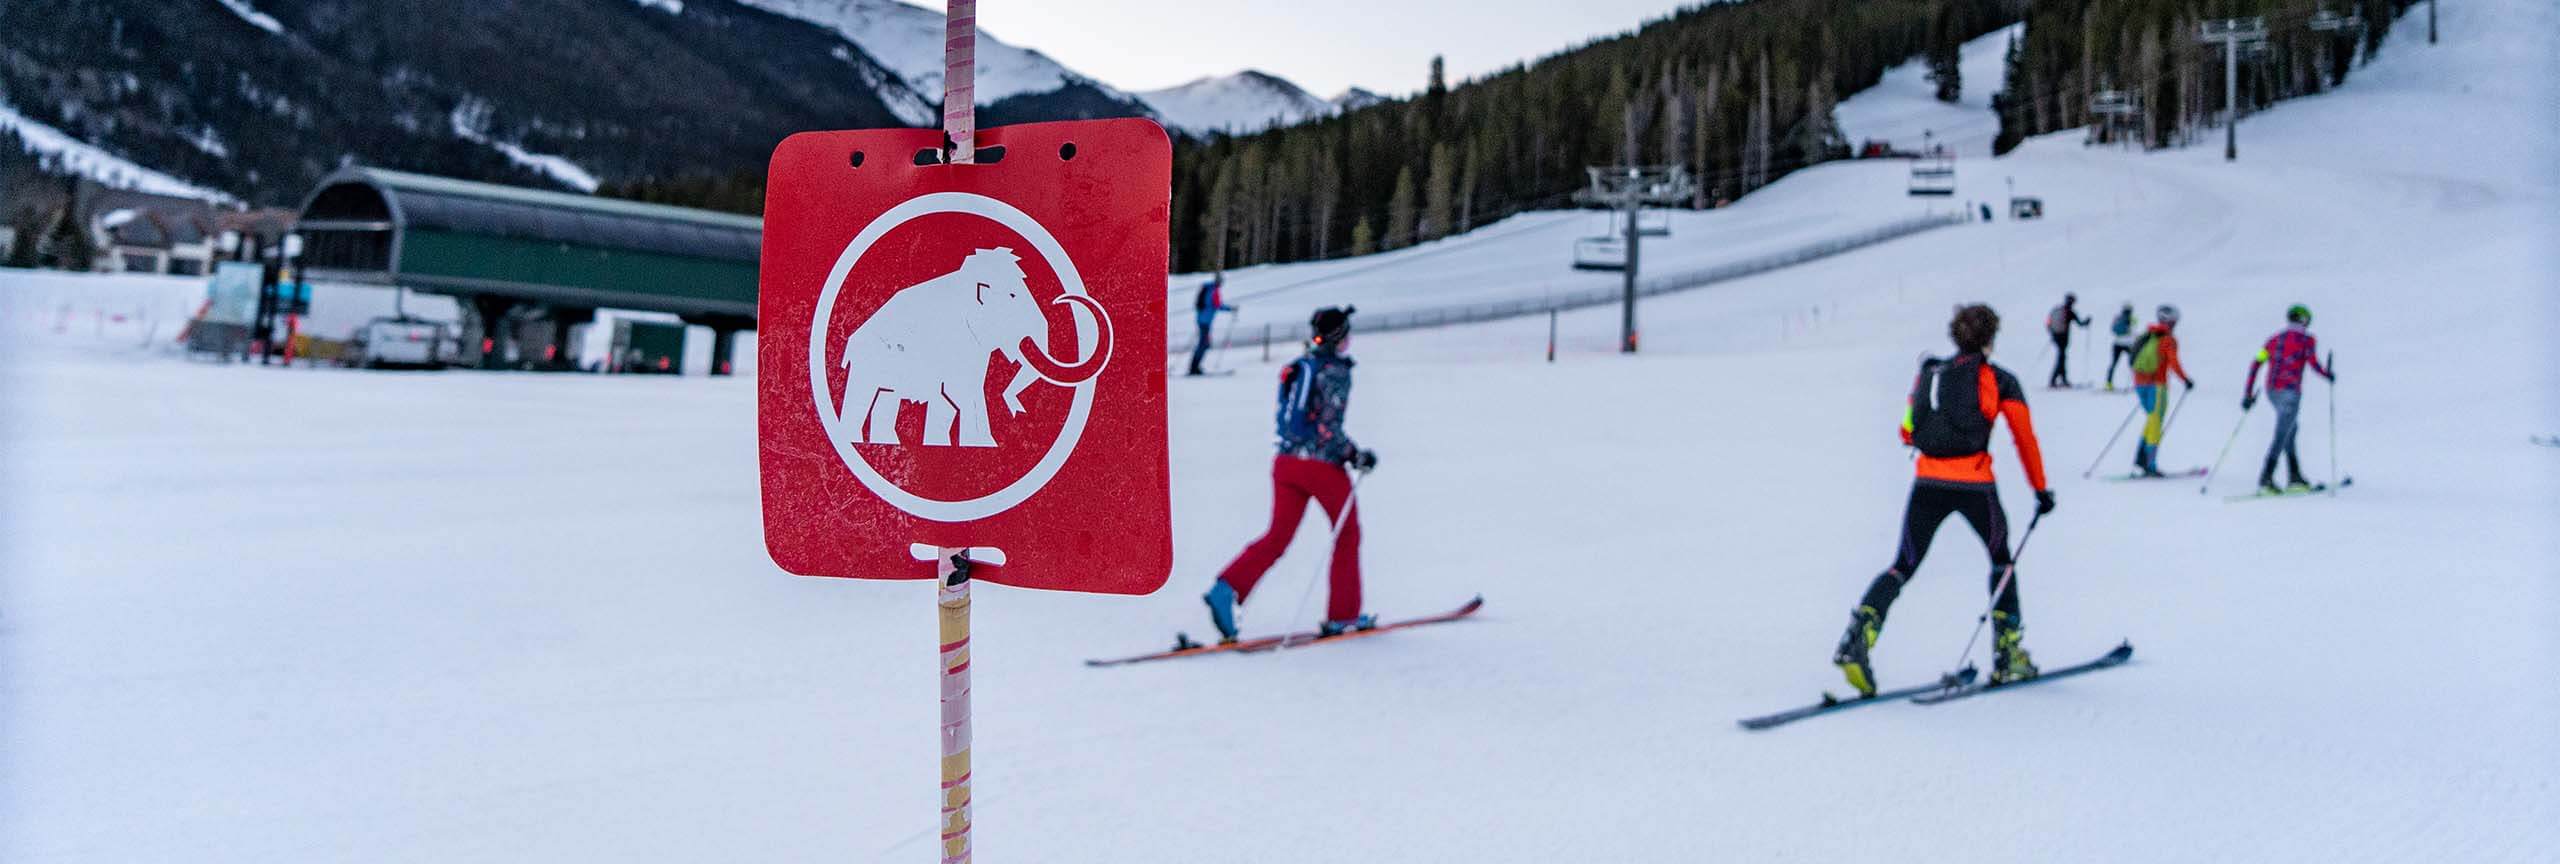 Mammut logo on sign and group of uphill skiers in background